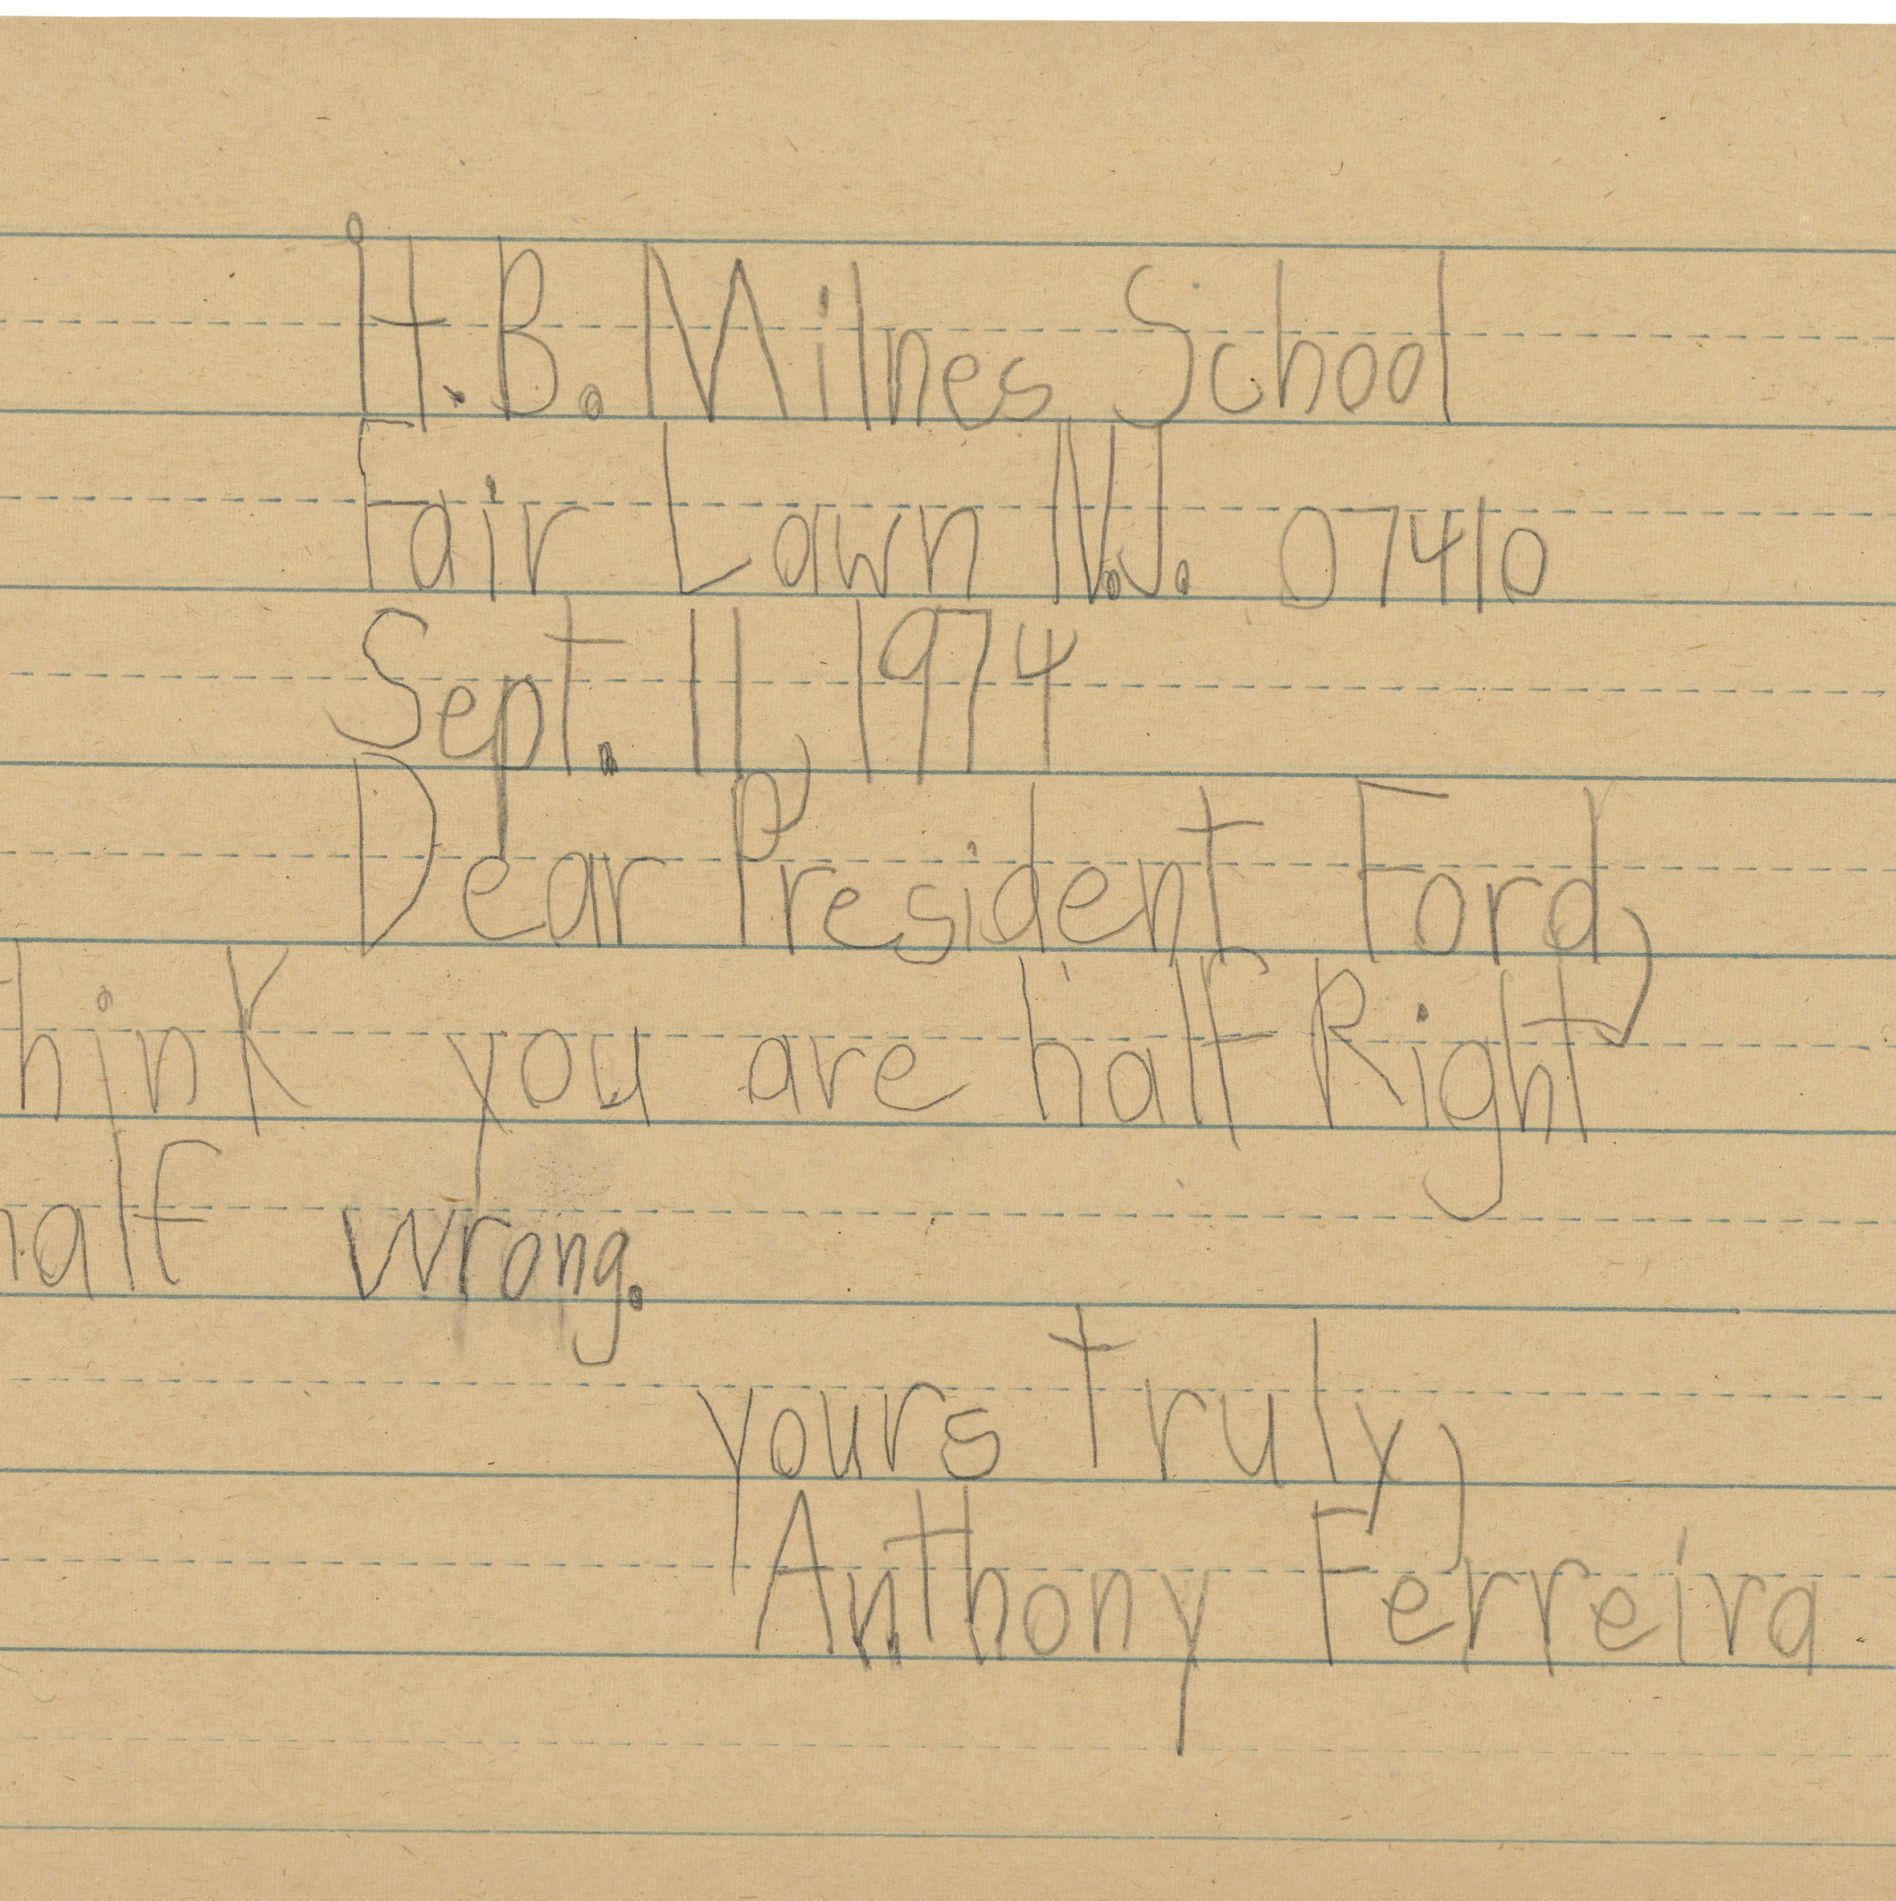 Letter to President Gerald Ford from Anthony Ferreira